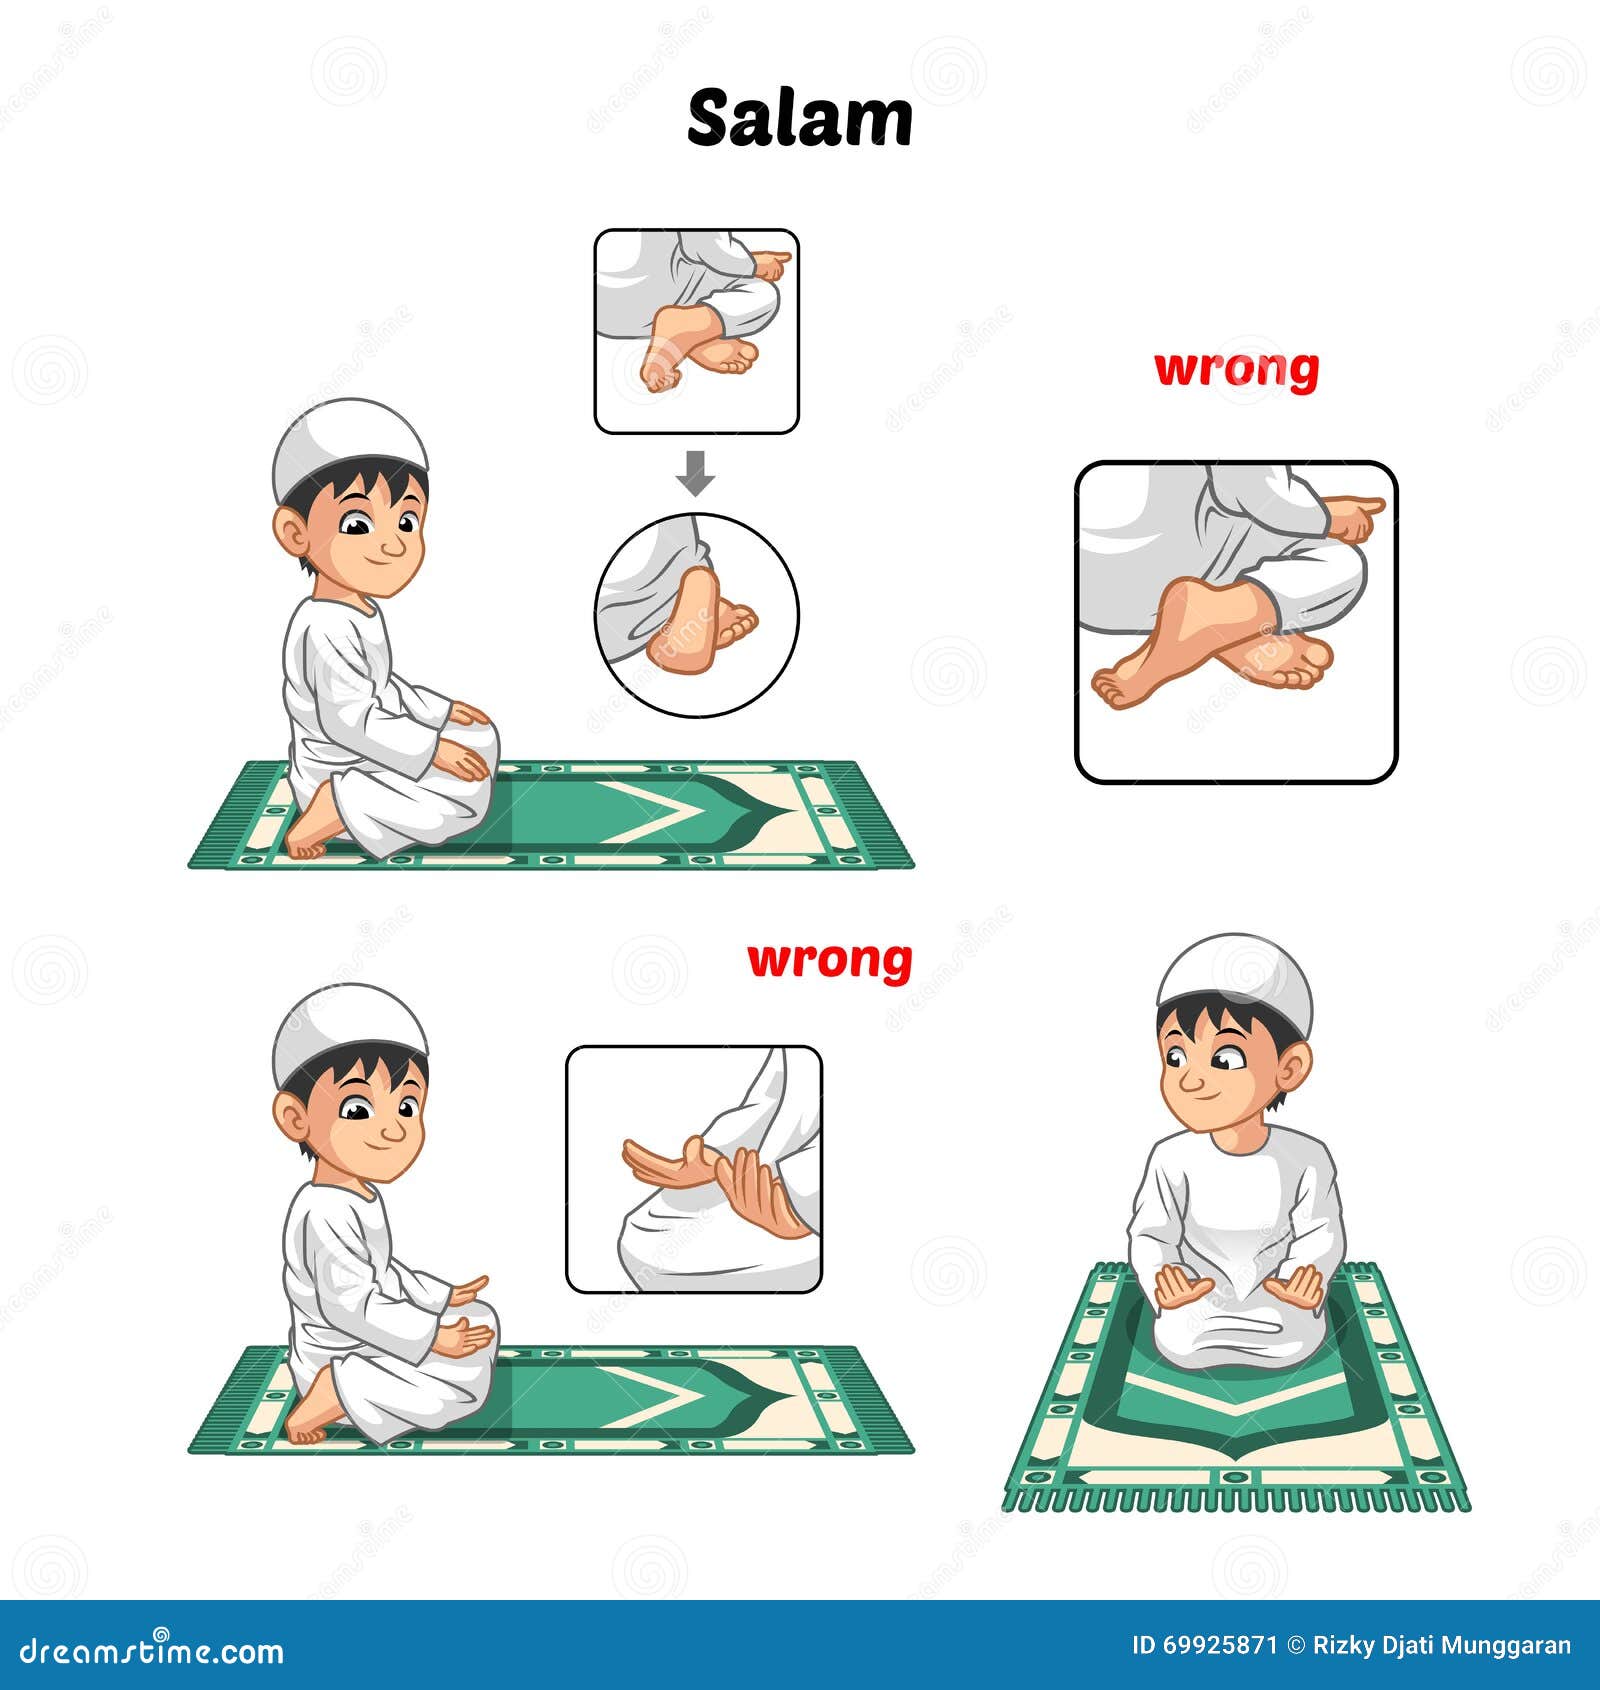 muslim prayer position guide step by step perform by boy salutation and position of the feet with wrong position